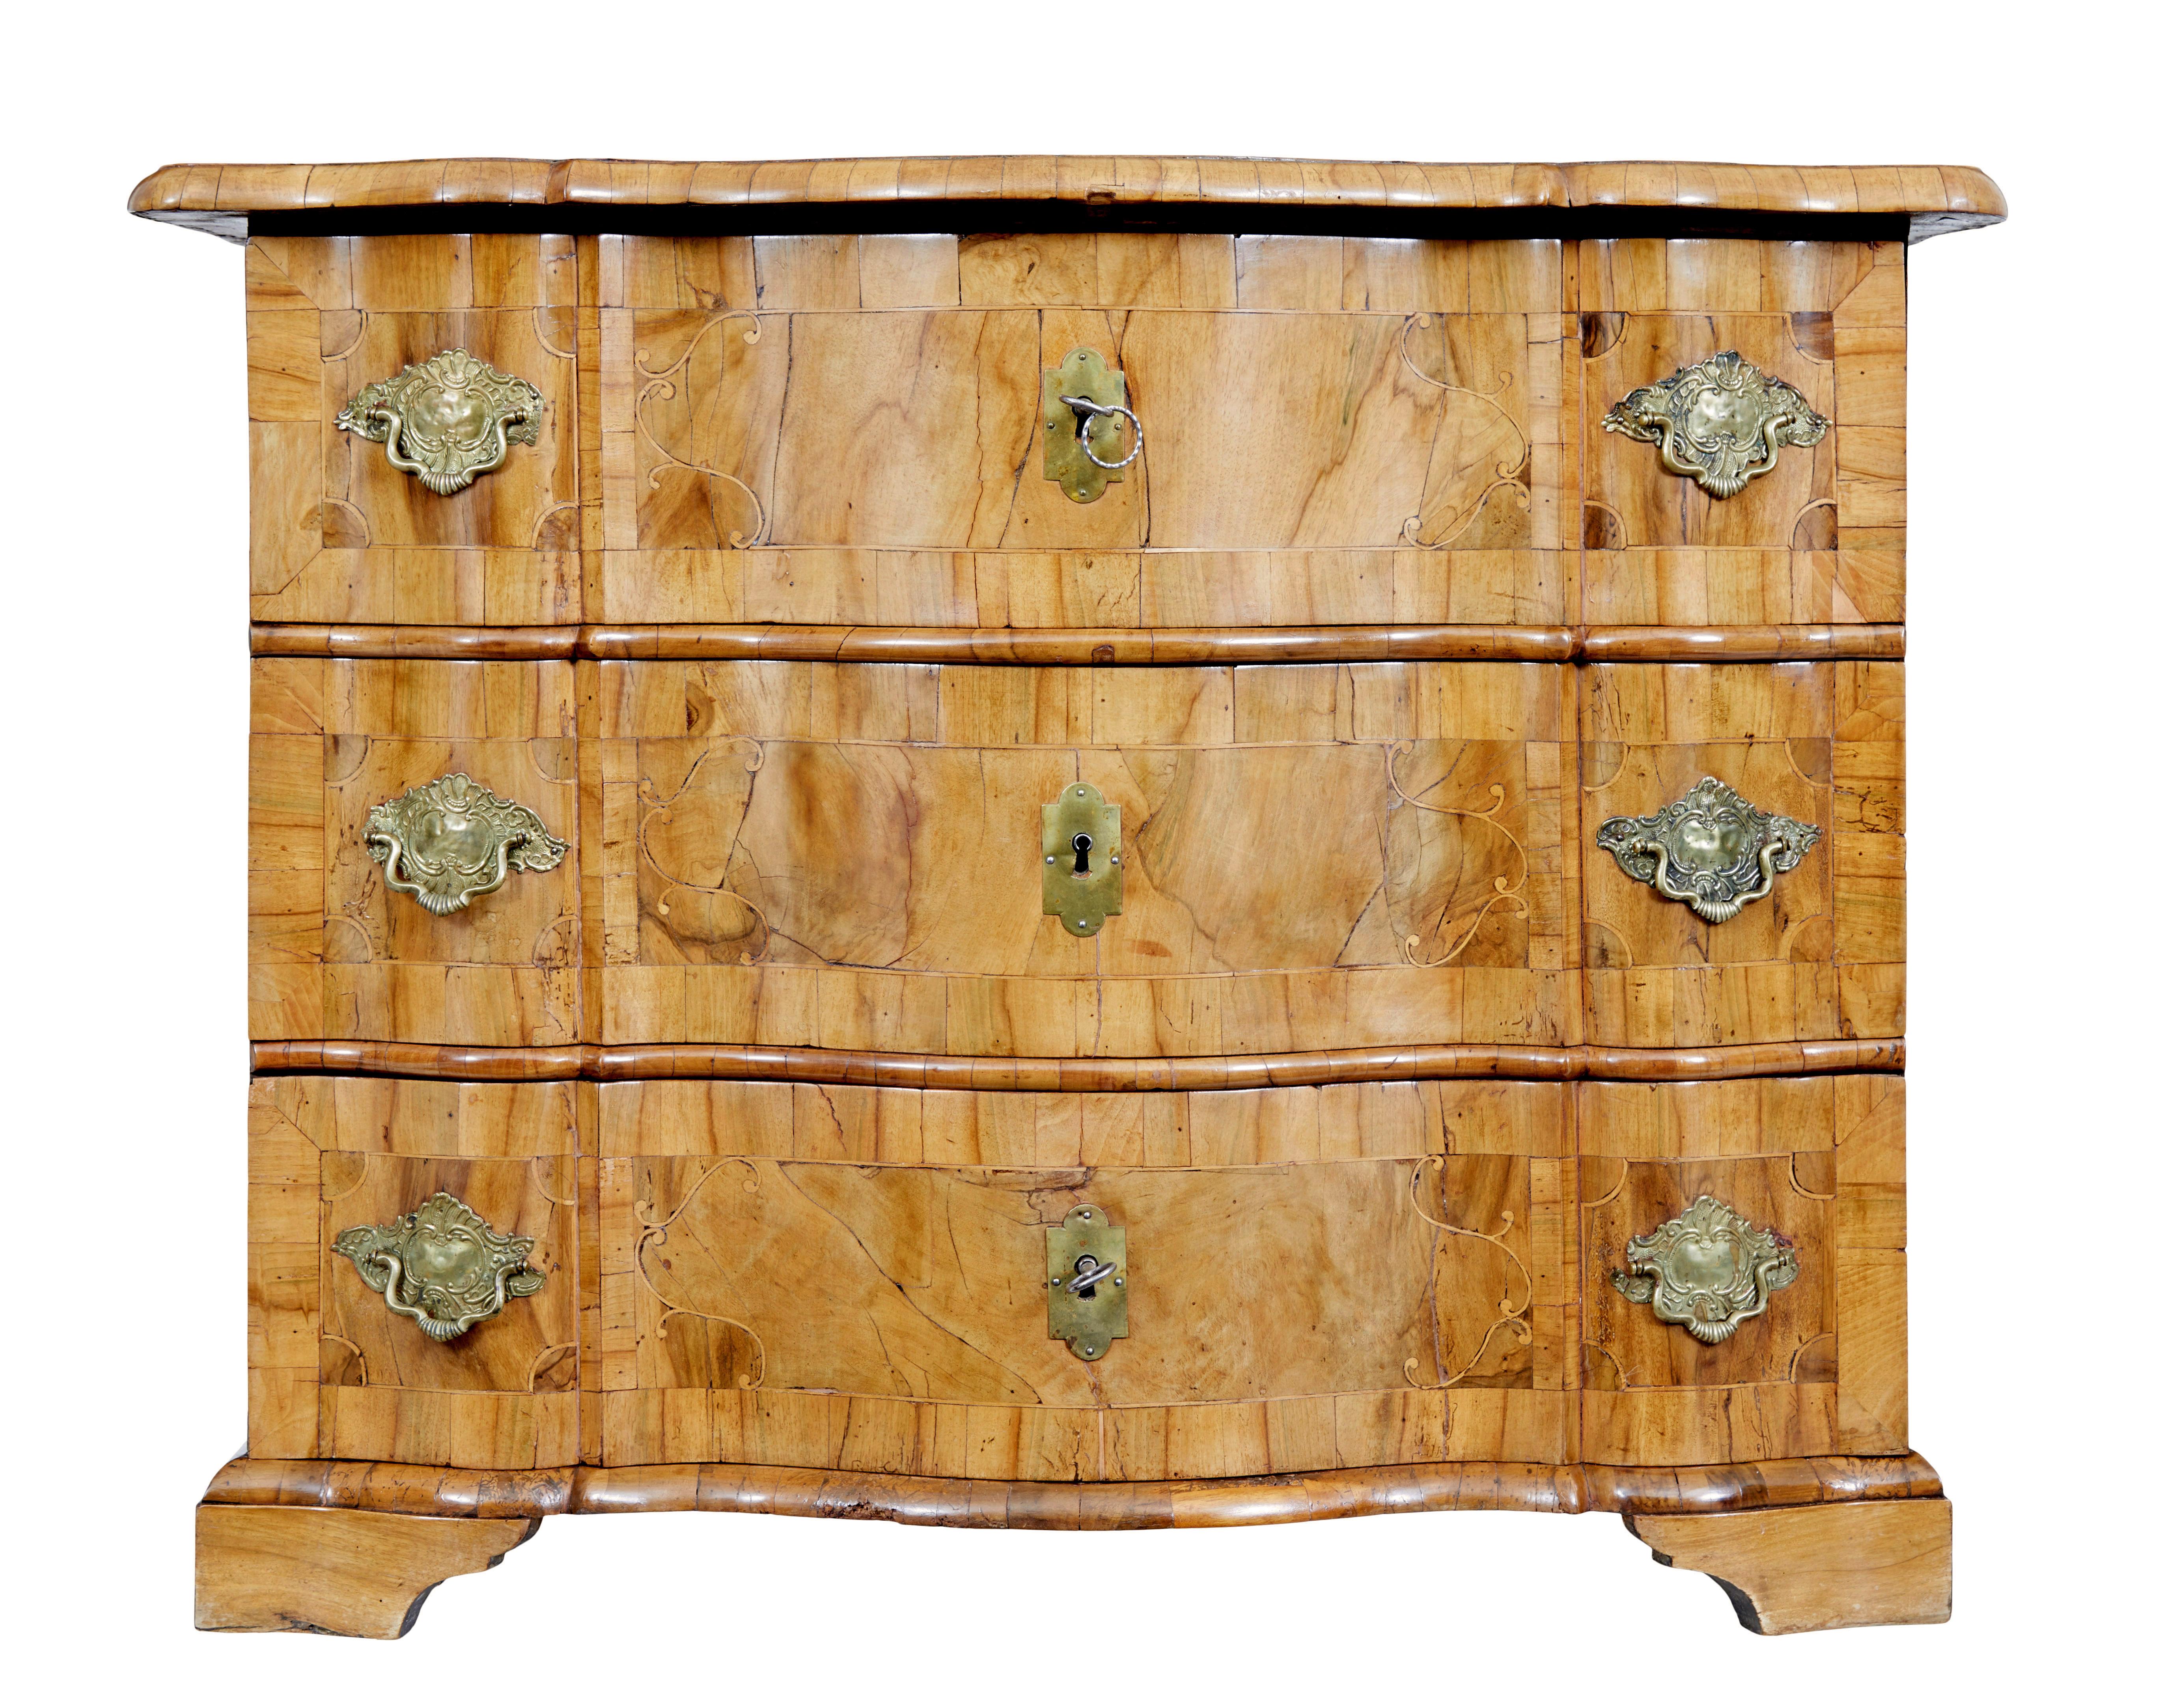 Fine quality 18th century burr walnut chest of drawers circa 1730.

Fine quality swedish commode circa 1730.

Beautiful natural colour which has taken nearly 300 years to develop.  Serpentine over sailing top.  3 shaped drawer fronts with inlay and